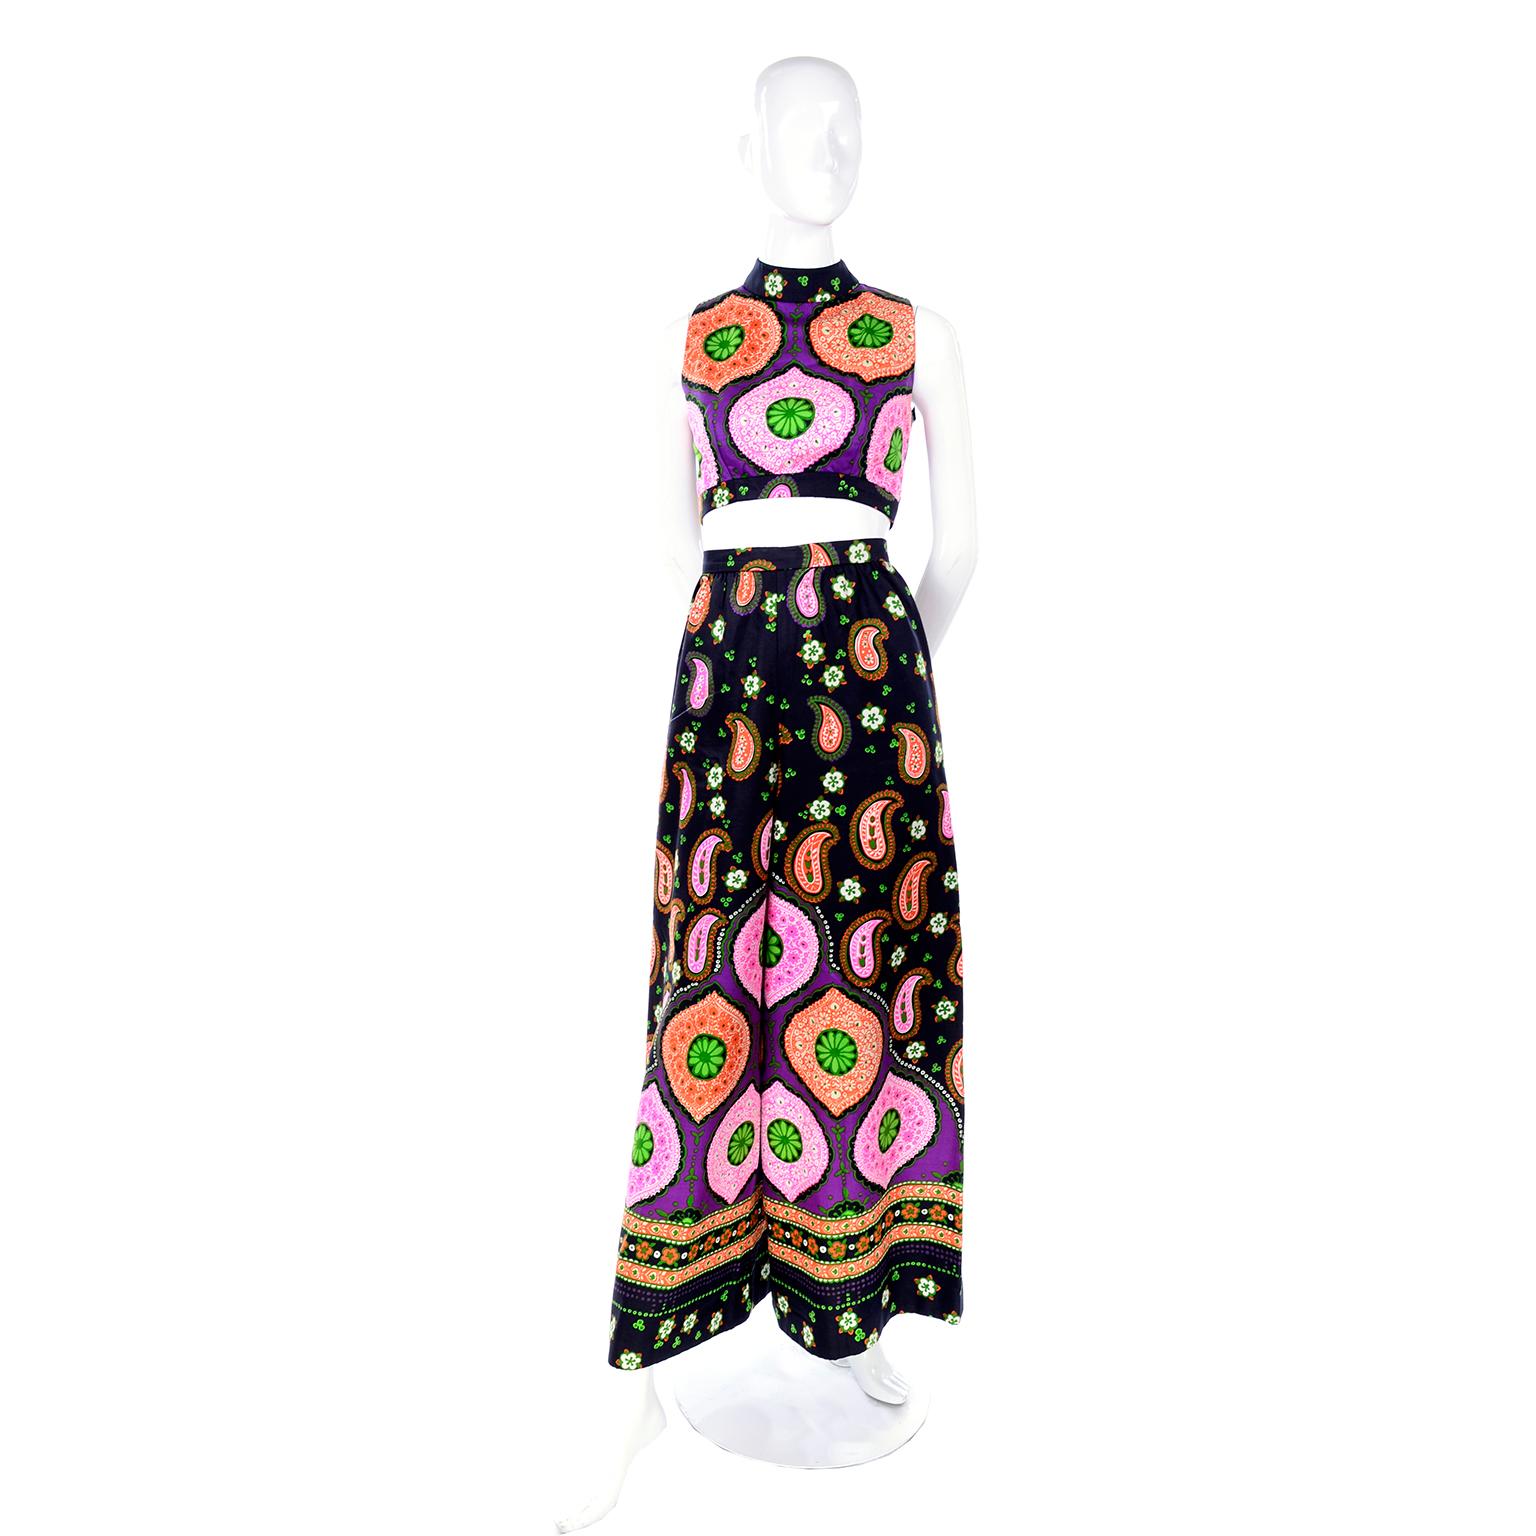 This is such a great 2 piece outfit that would be perfect for any  summer party and is the perfect day dress alternative! The ensemble has a crop top and wide leg pants in black cotton with an orange, pink and green paisley and floral print. The top